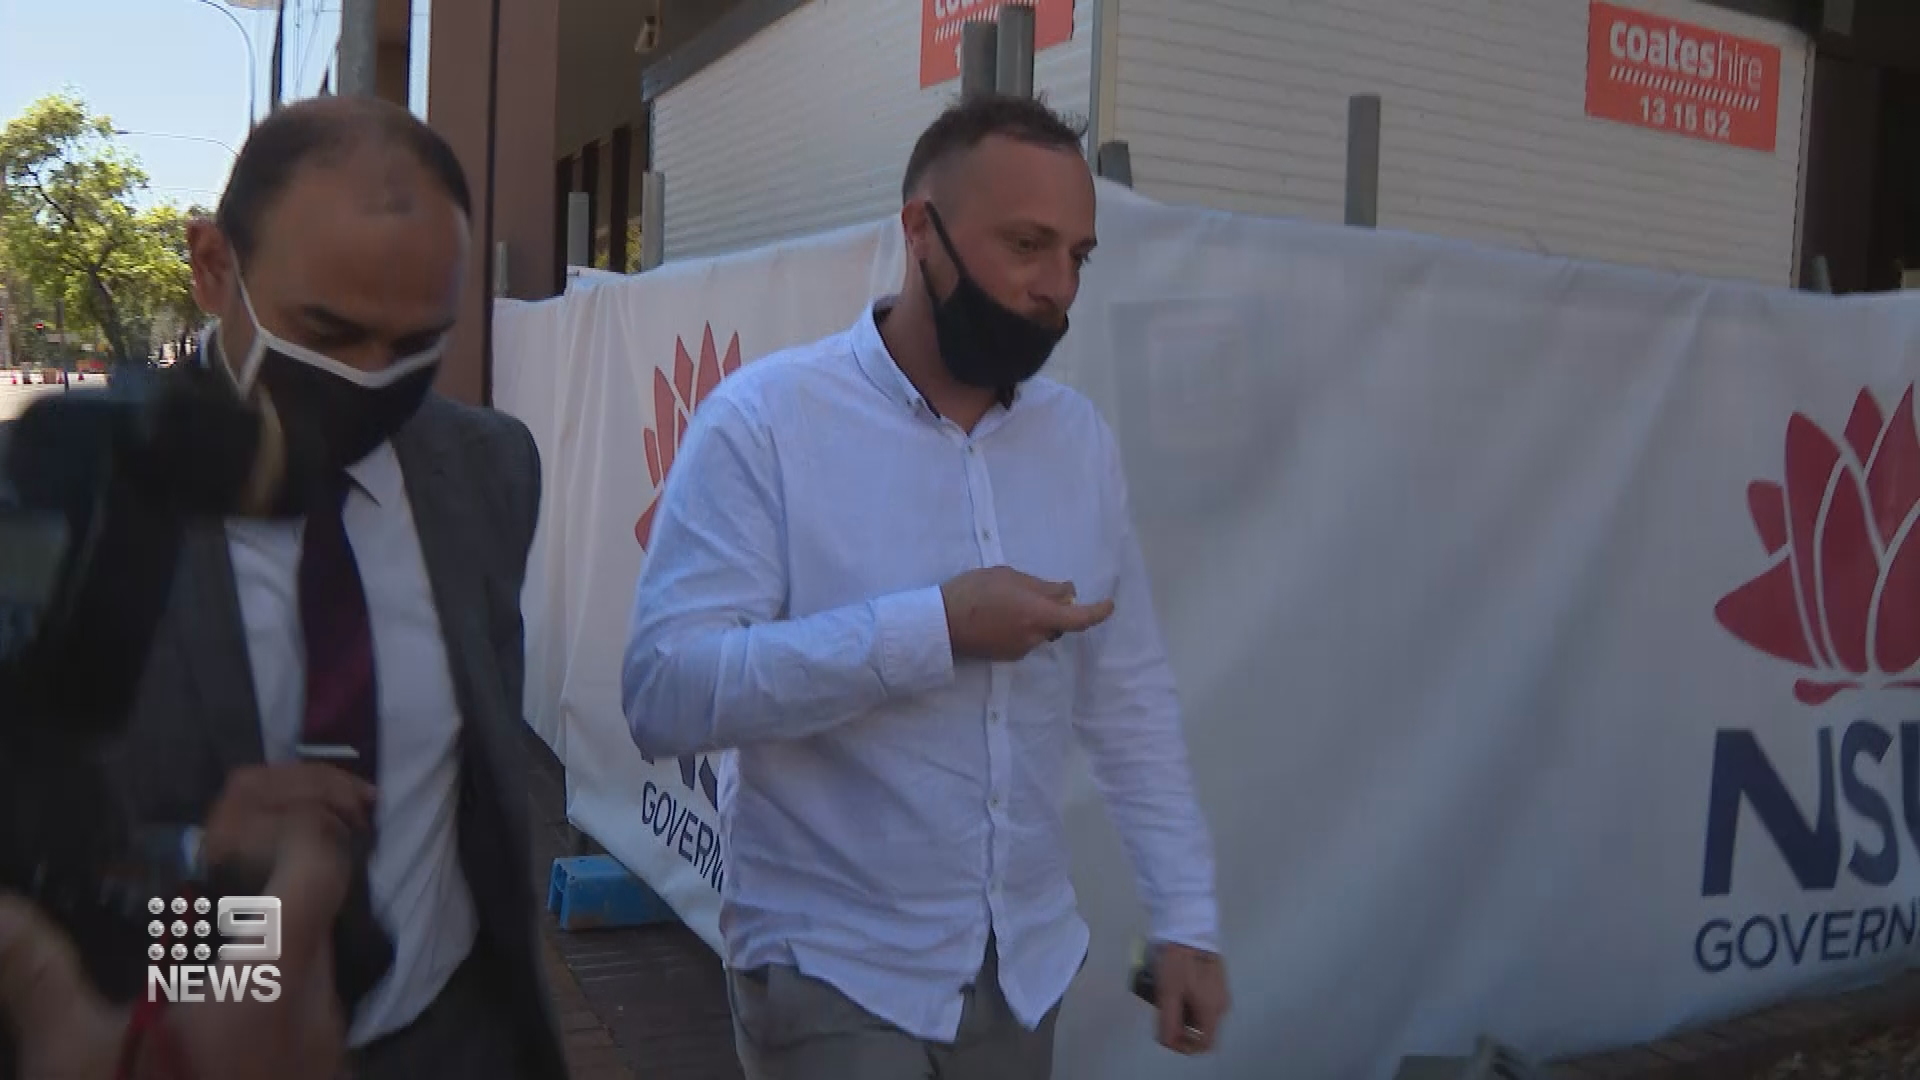 Mitchell Cole, who is awaiting sentence for pocketing thousands of dollars from victims, is alleged to have used Mr Morrison's name when looking for work.